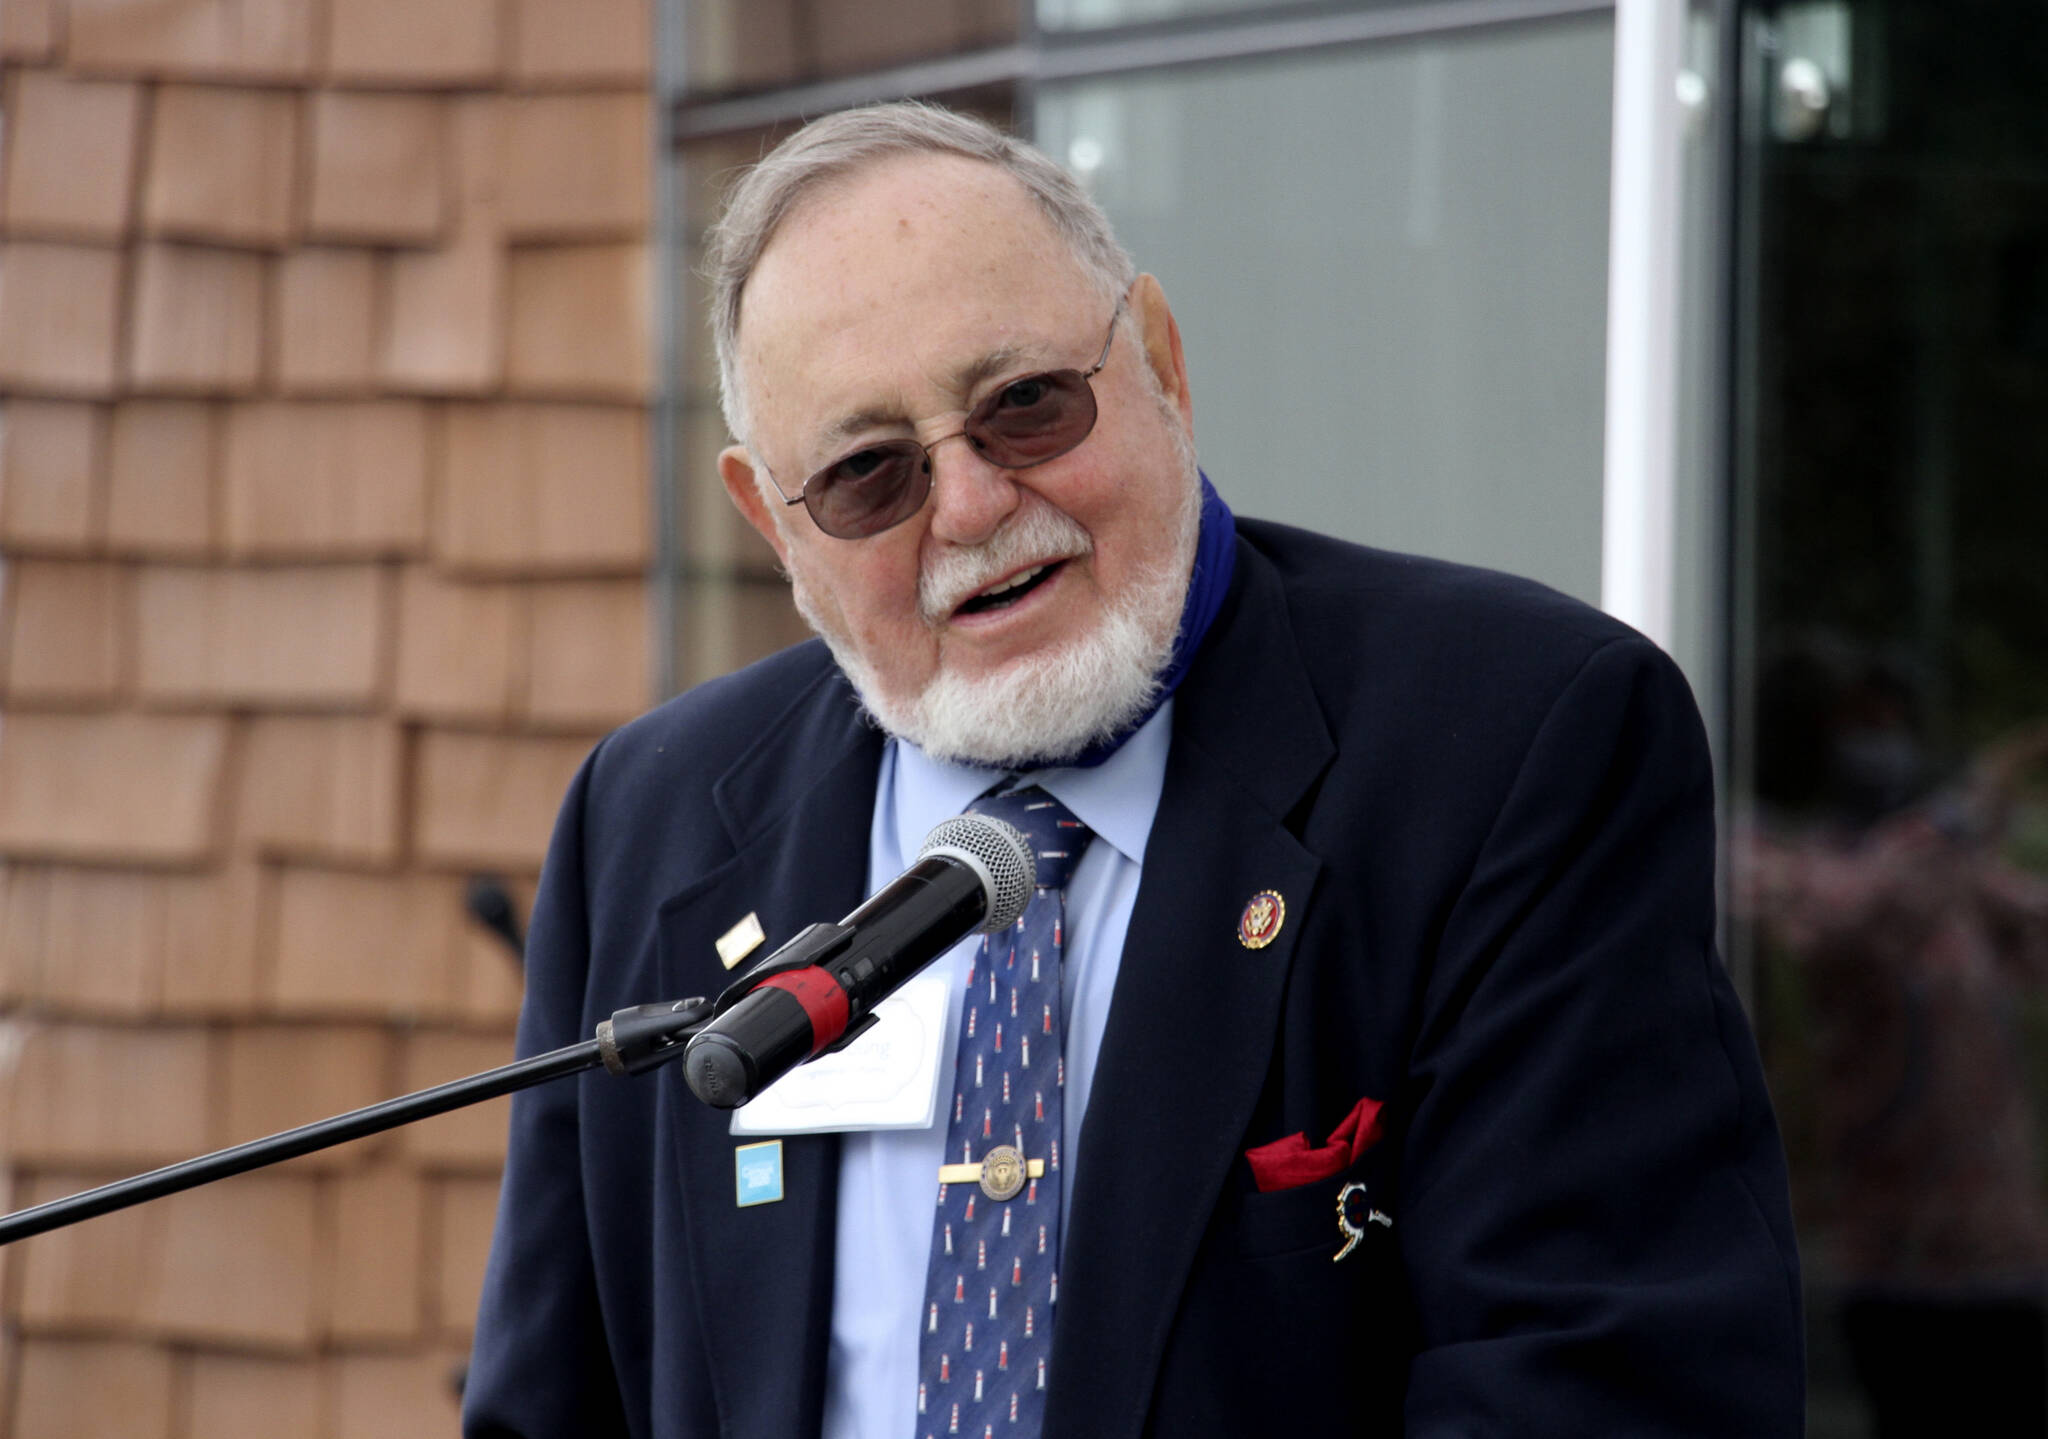 In this Aug. 26, 2020, file photo, U.S. Rep. Don Young, an Alaska Republican, speaks during a ceremony in Anchorage, Alaska. The longest-serving Republican in the U.S. House is appearing in a new round of ads urging Alaskans to get vaccinated against COVID-19. Ads featuring Young are being paid for by the Conquer COVID Coalition, Young spokesperson Zack Brown said by email Monday, Oct. 18, 2021. (AP Photo/Mark Thiessen, File)